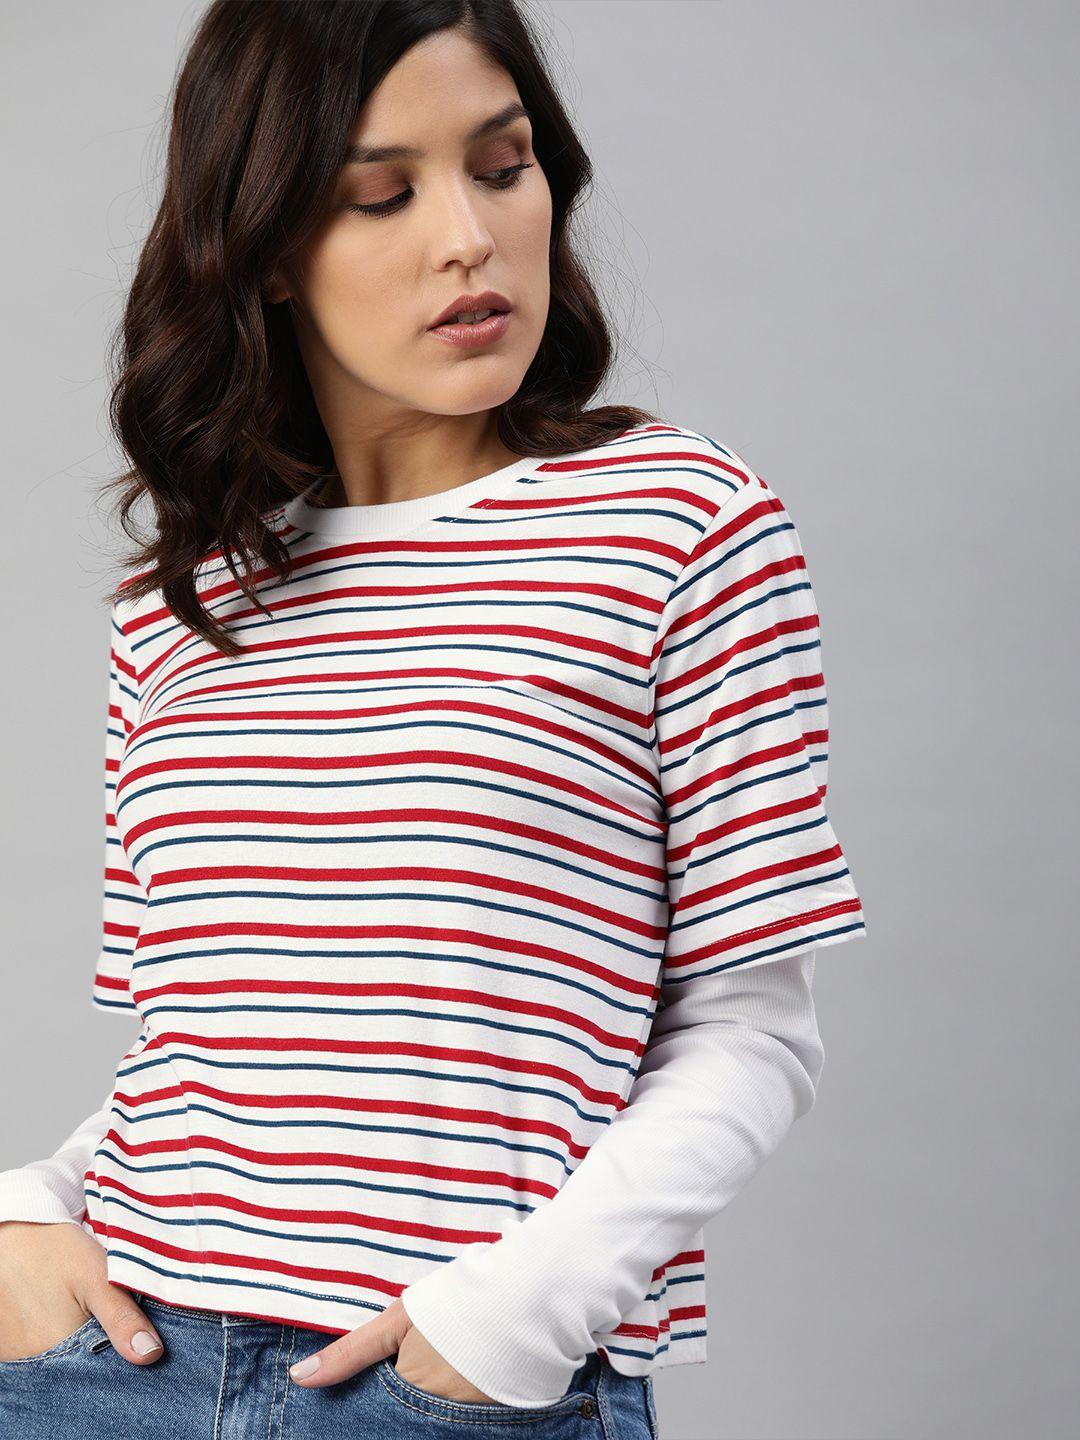 the-roadster-lifestyle-co-women-white--red-striped-round-neck-pure-cotton-t-shirt-with-doctor-sleeves